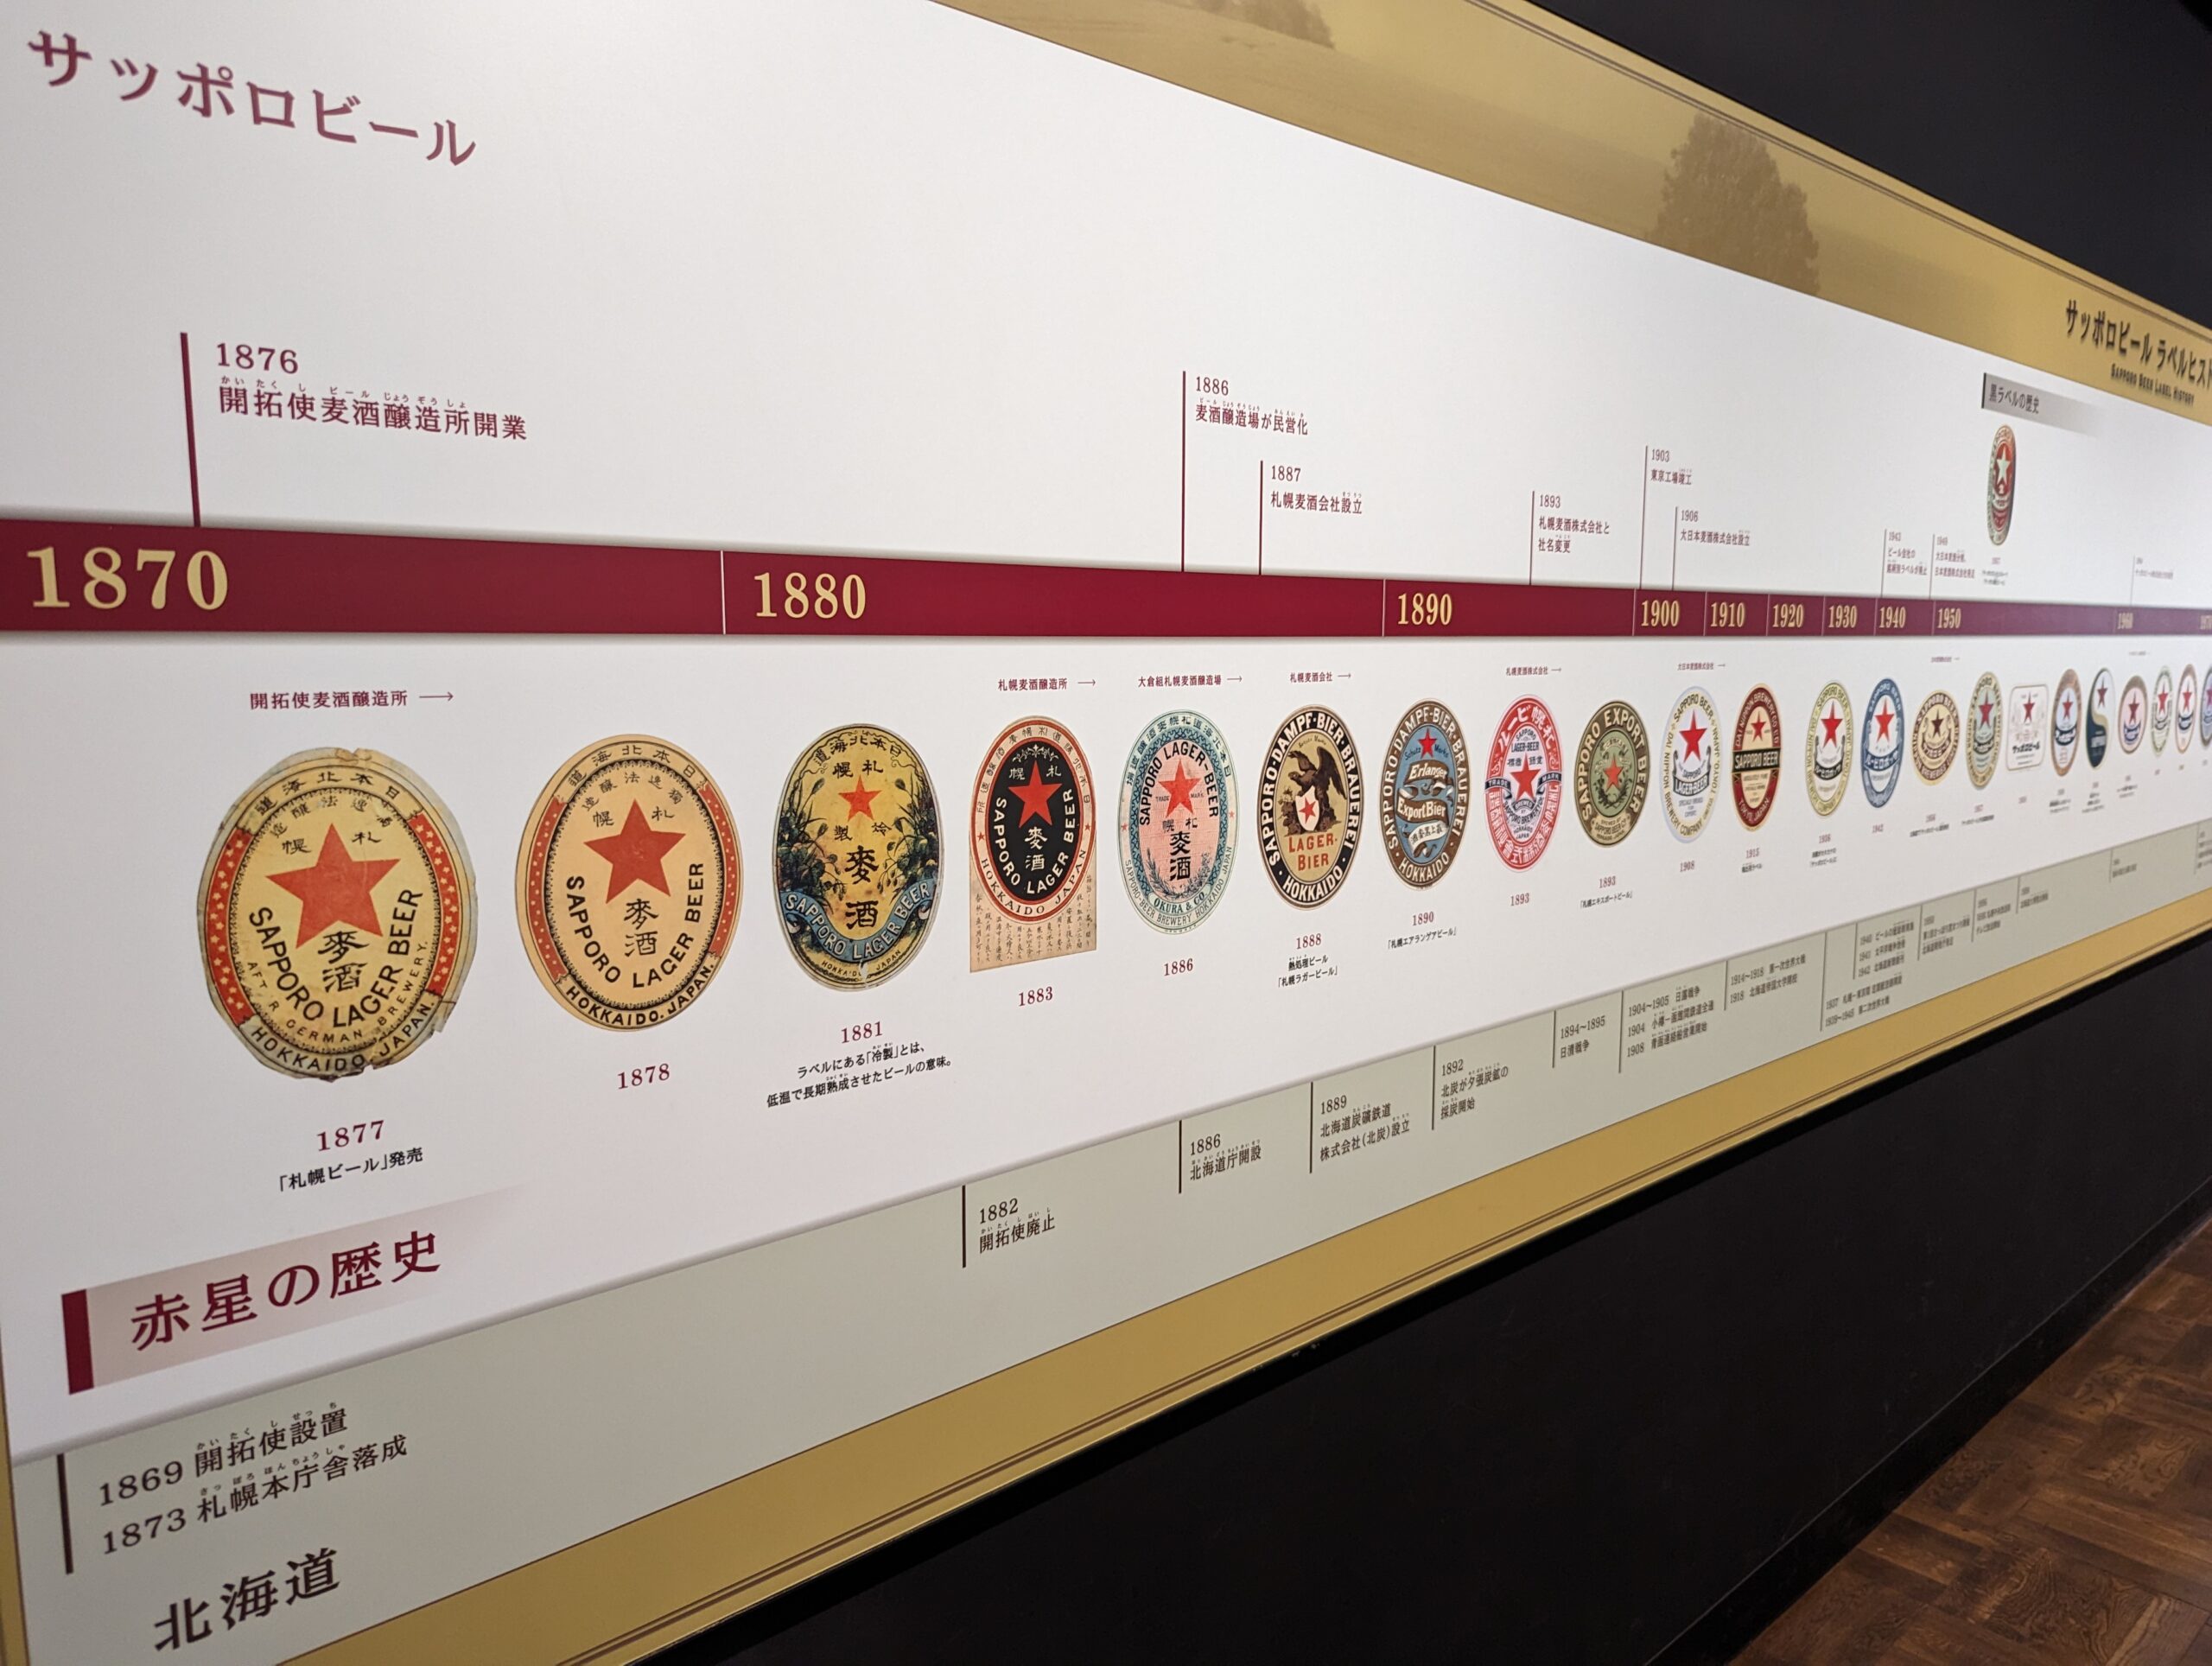 Image of wall display of long timeline for Sapporo Brewery.